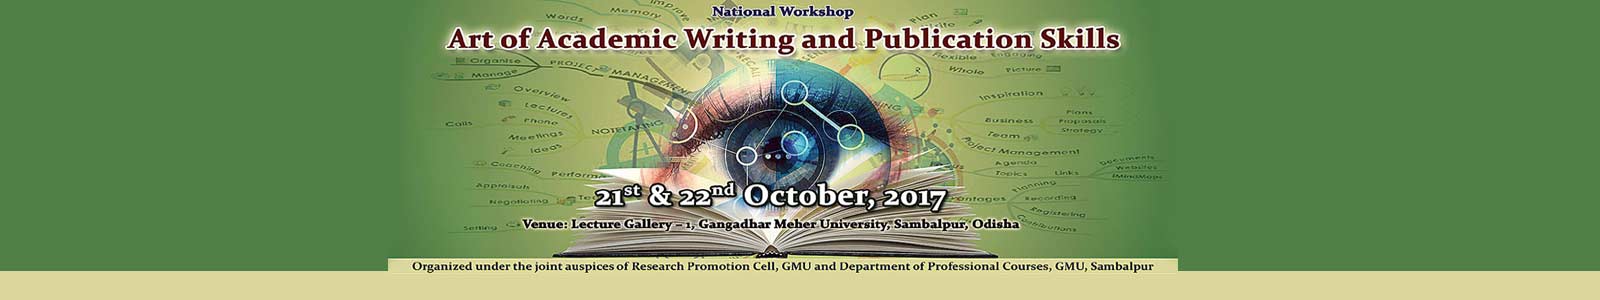 National Workshop on Art of Academic writing and Publication Skills